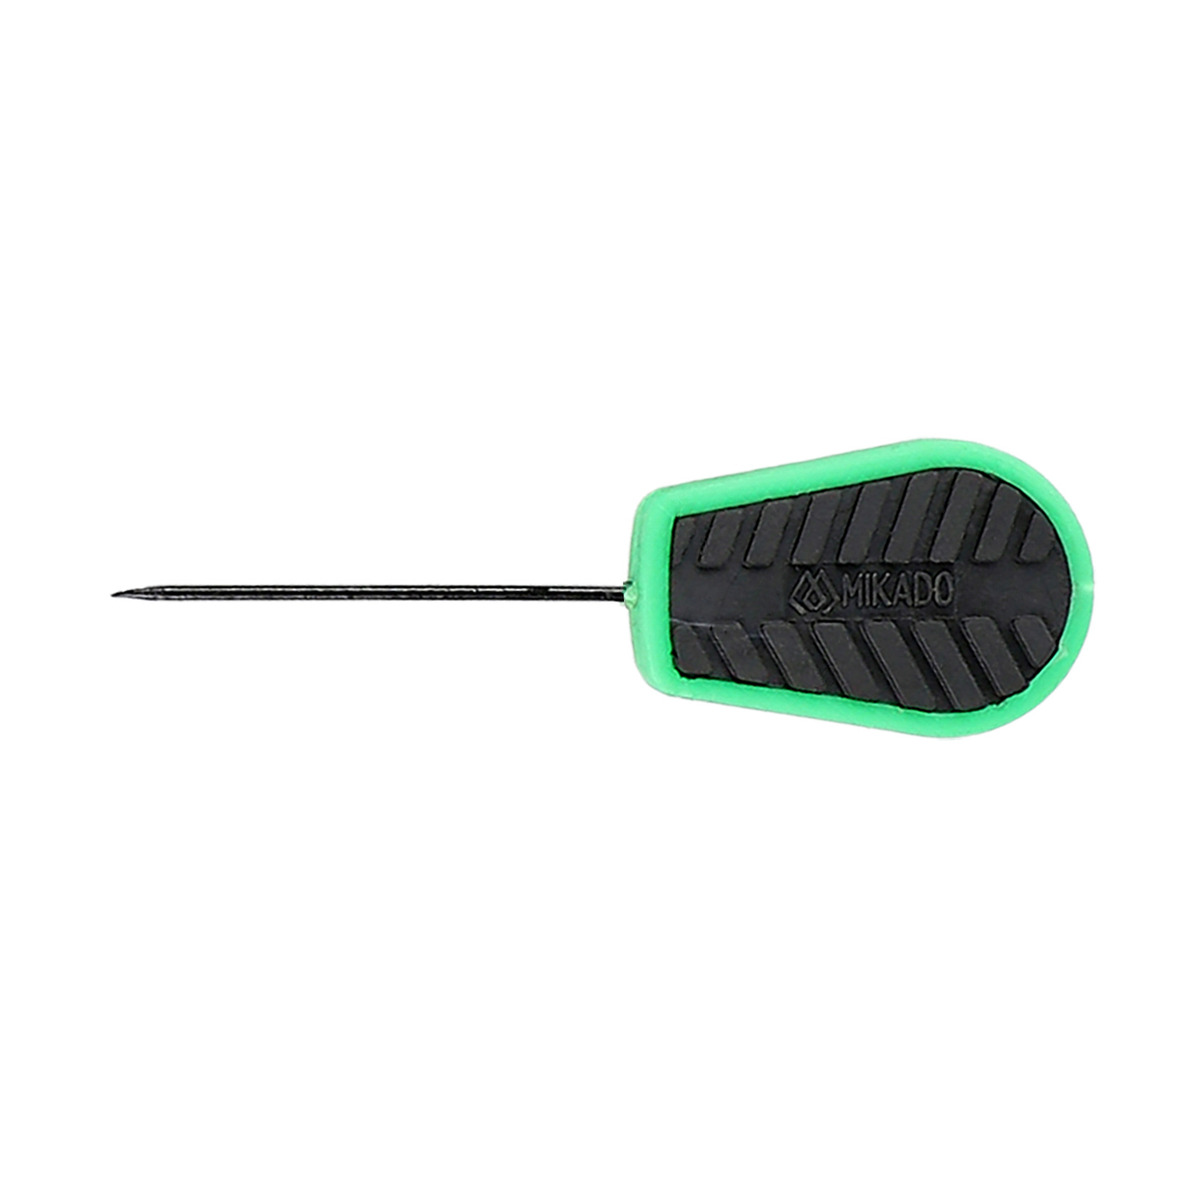 Mikado Baiting Needle - GATED NEEDLE FOR BOILIES